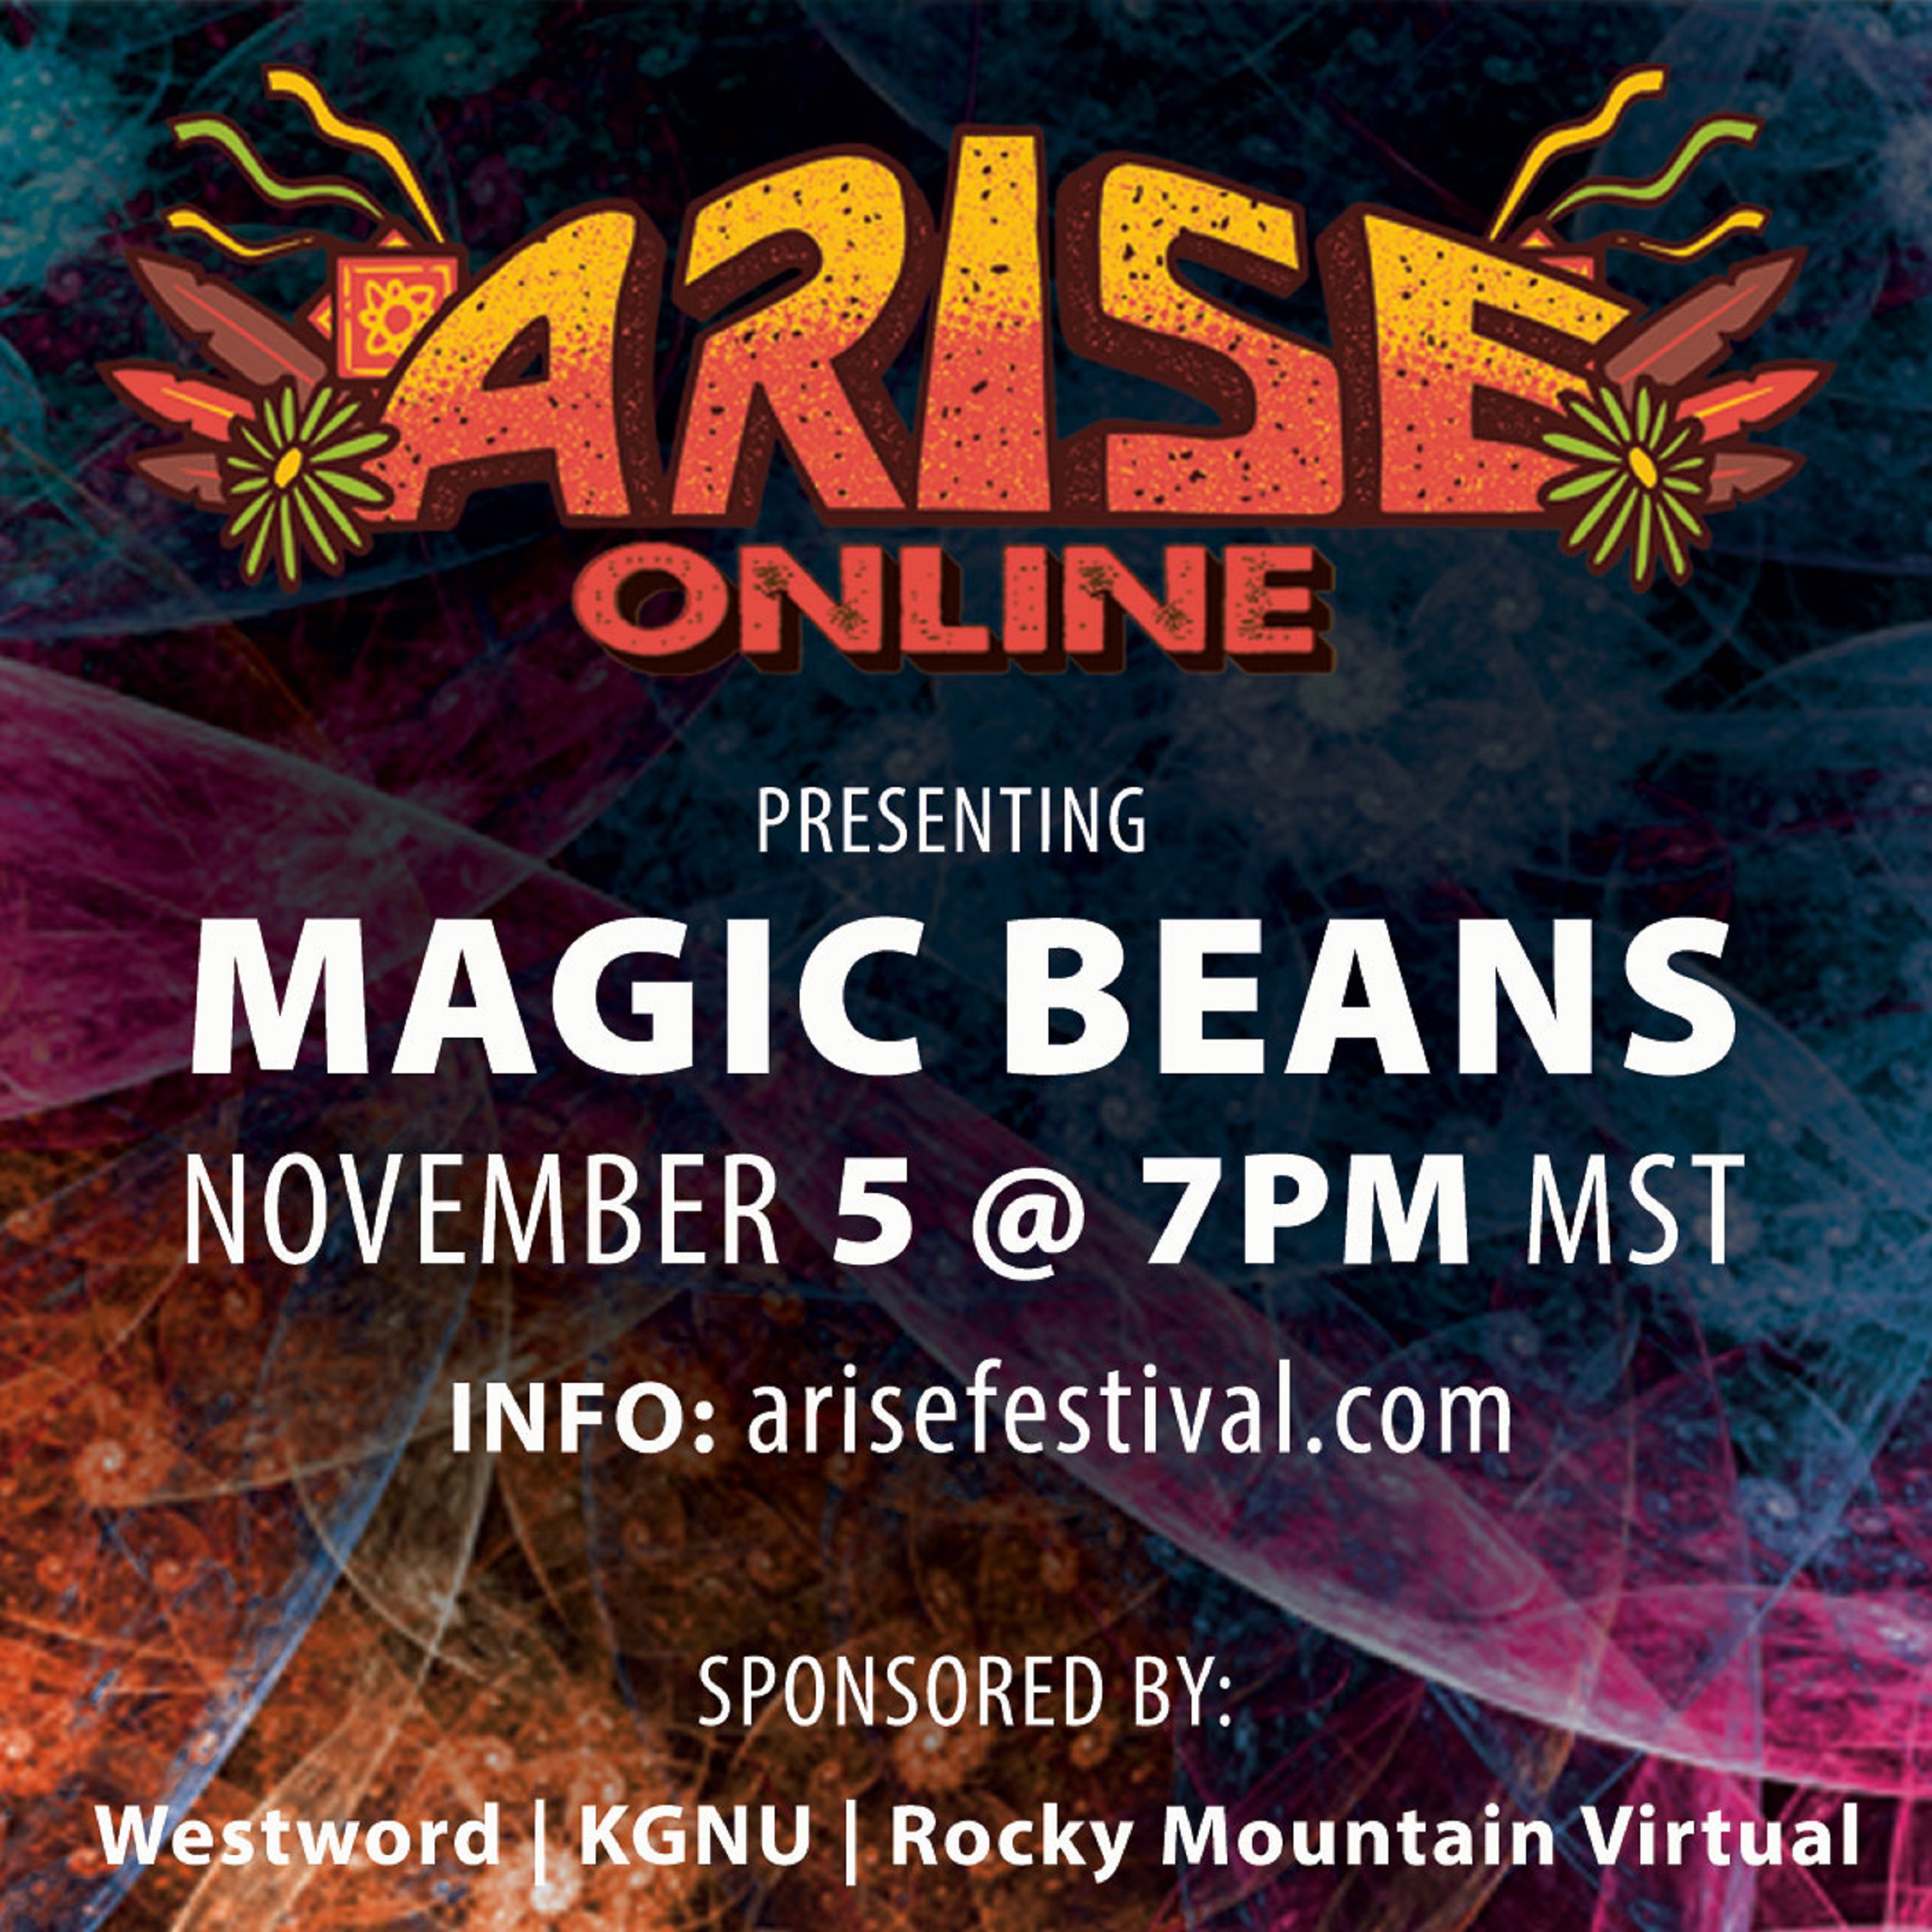 Arise Online spotlights Magic Beans  in first in-studio performance